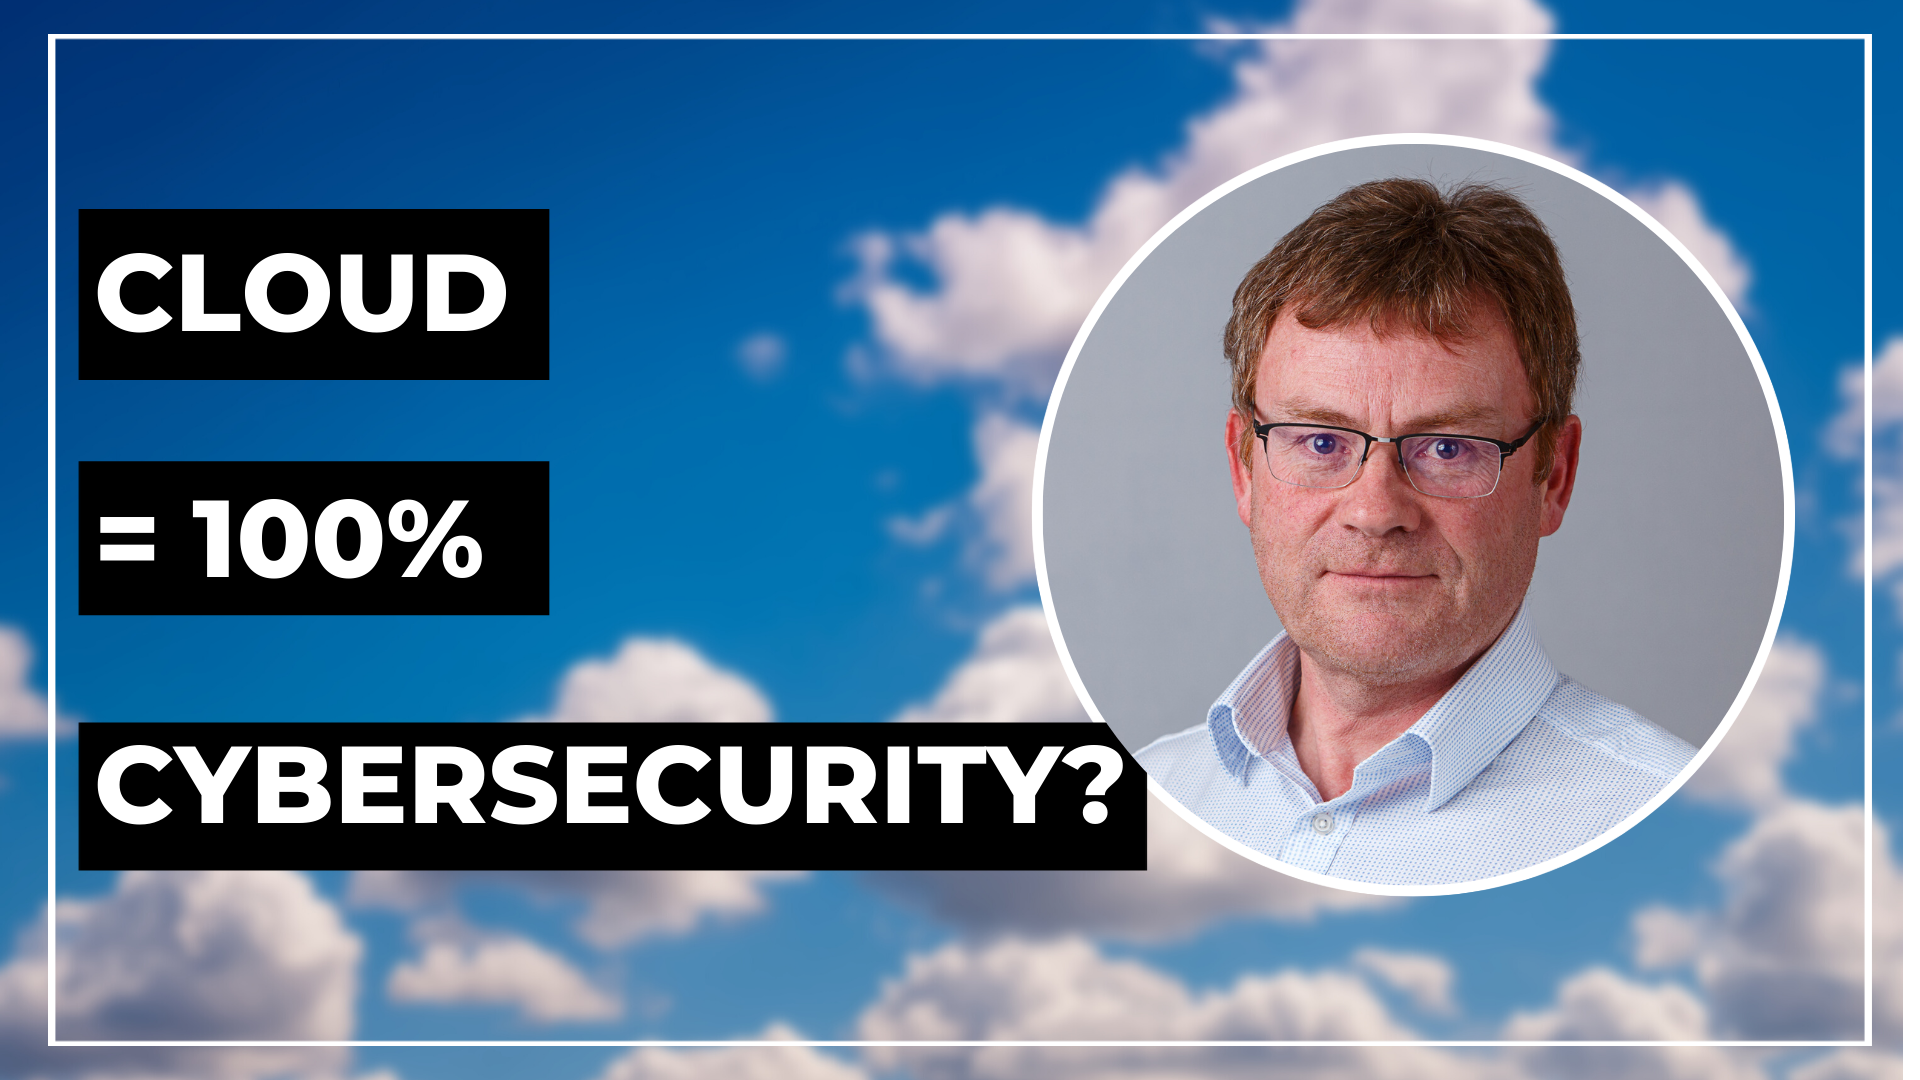 The Cloud provides 100% Cybersecurity - 15 Dangerous Cybersecurity Myths - Day 11